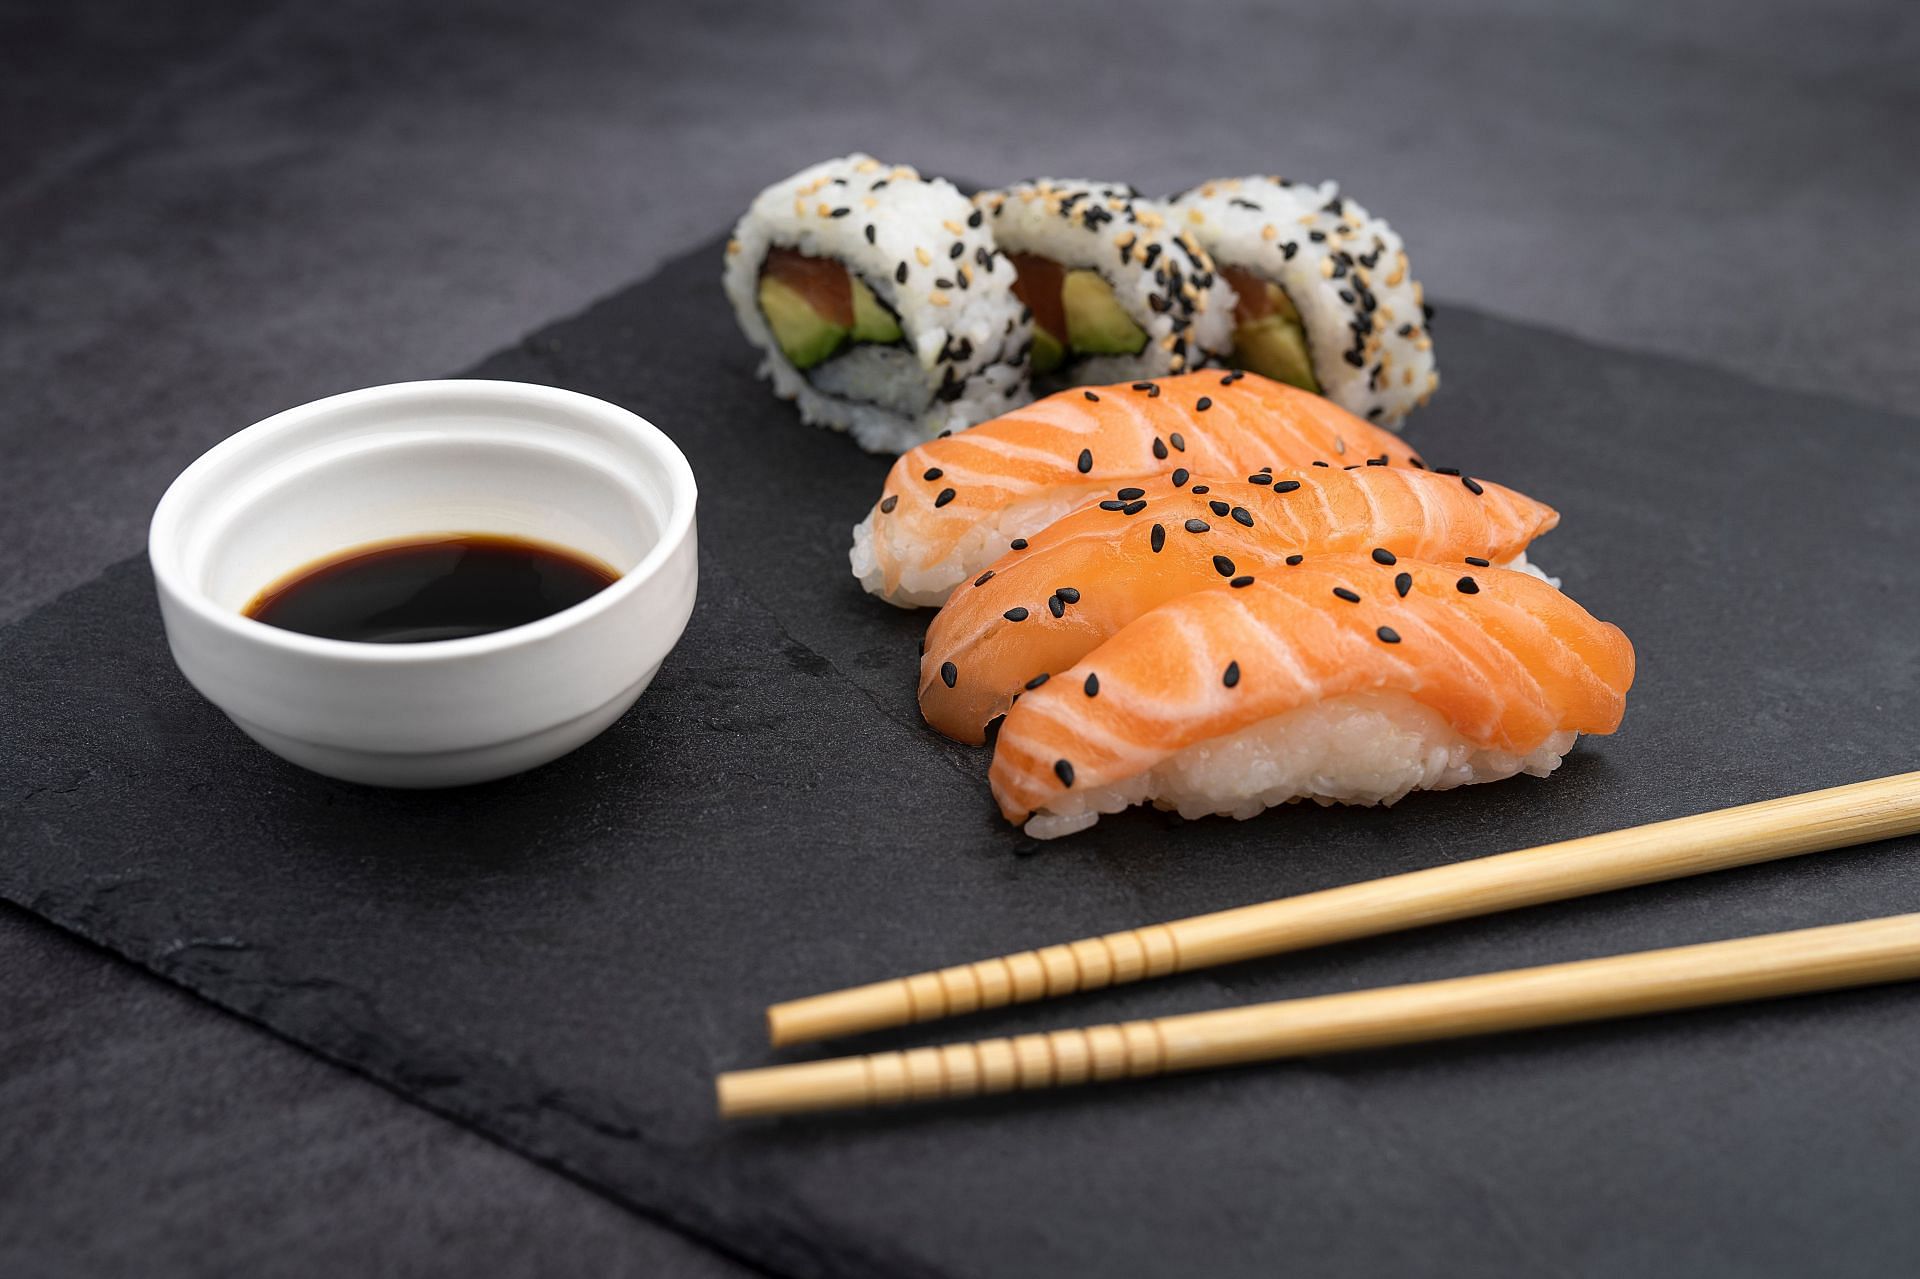 Sushi made using fresh fish can be good for weight loss (Image via Unsplash/Andraz Lazic)